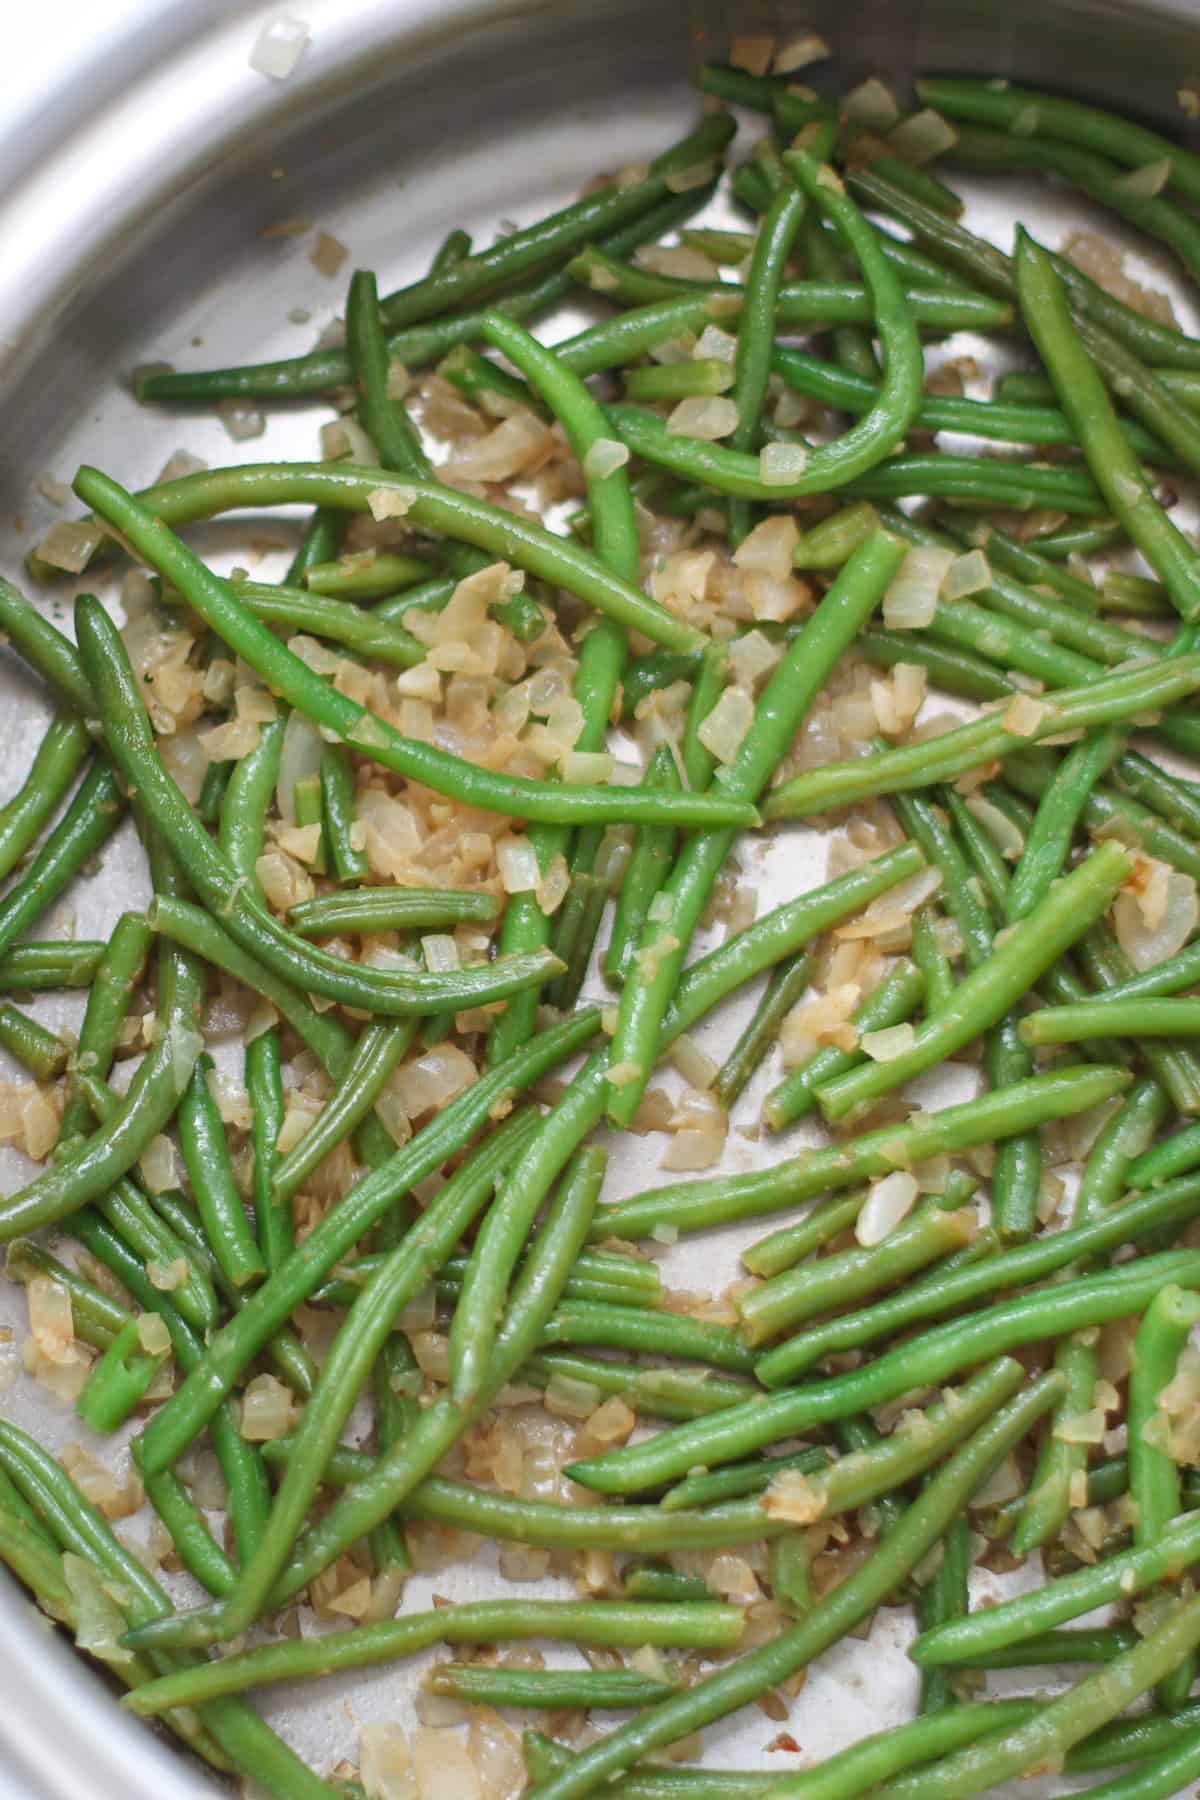 Sauteed green beans with onion and garlic.